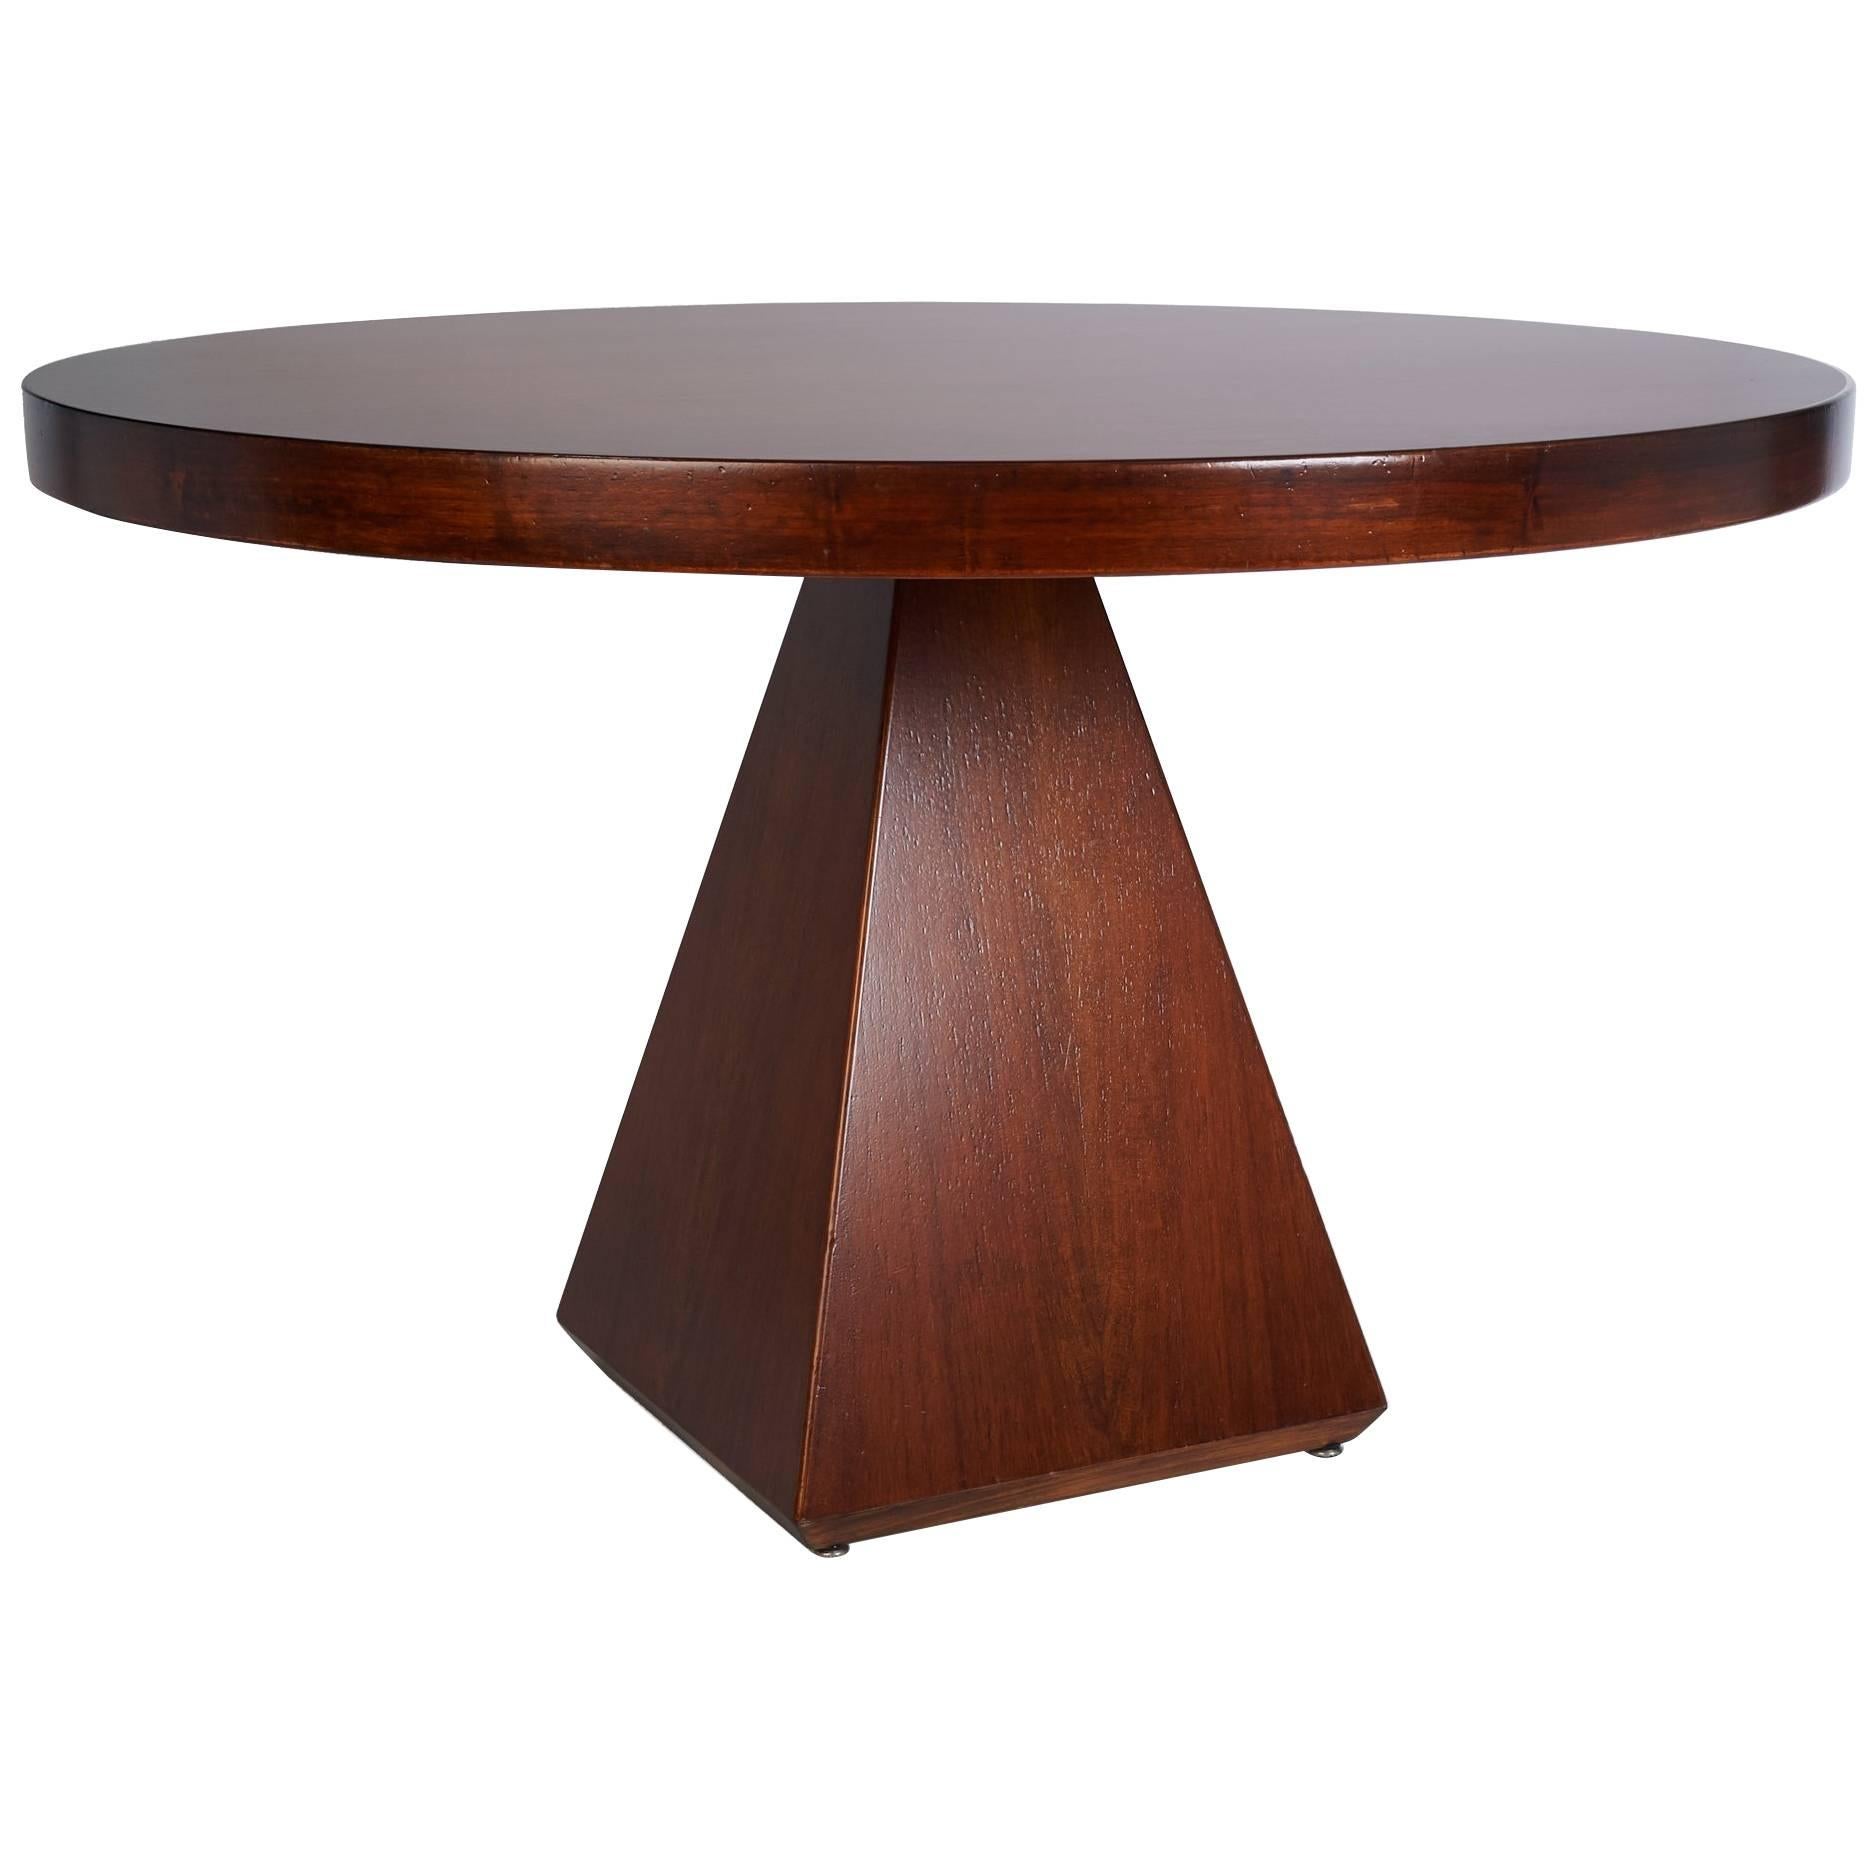 Vittorio Introini: Geometric Walnut Dining Table with Round Top, Italy 1960's For Sale